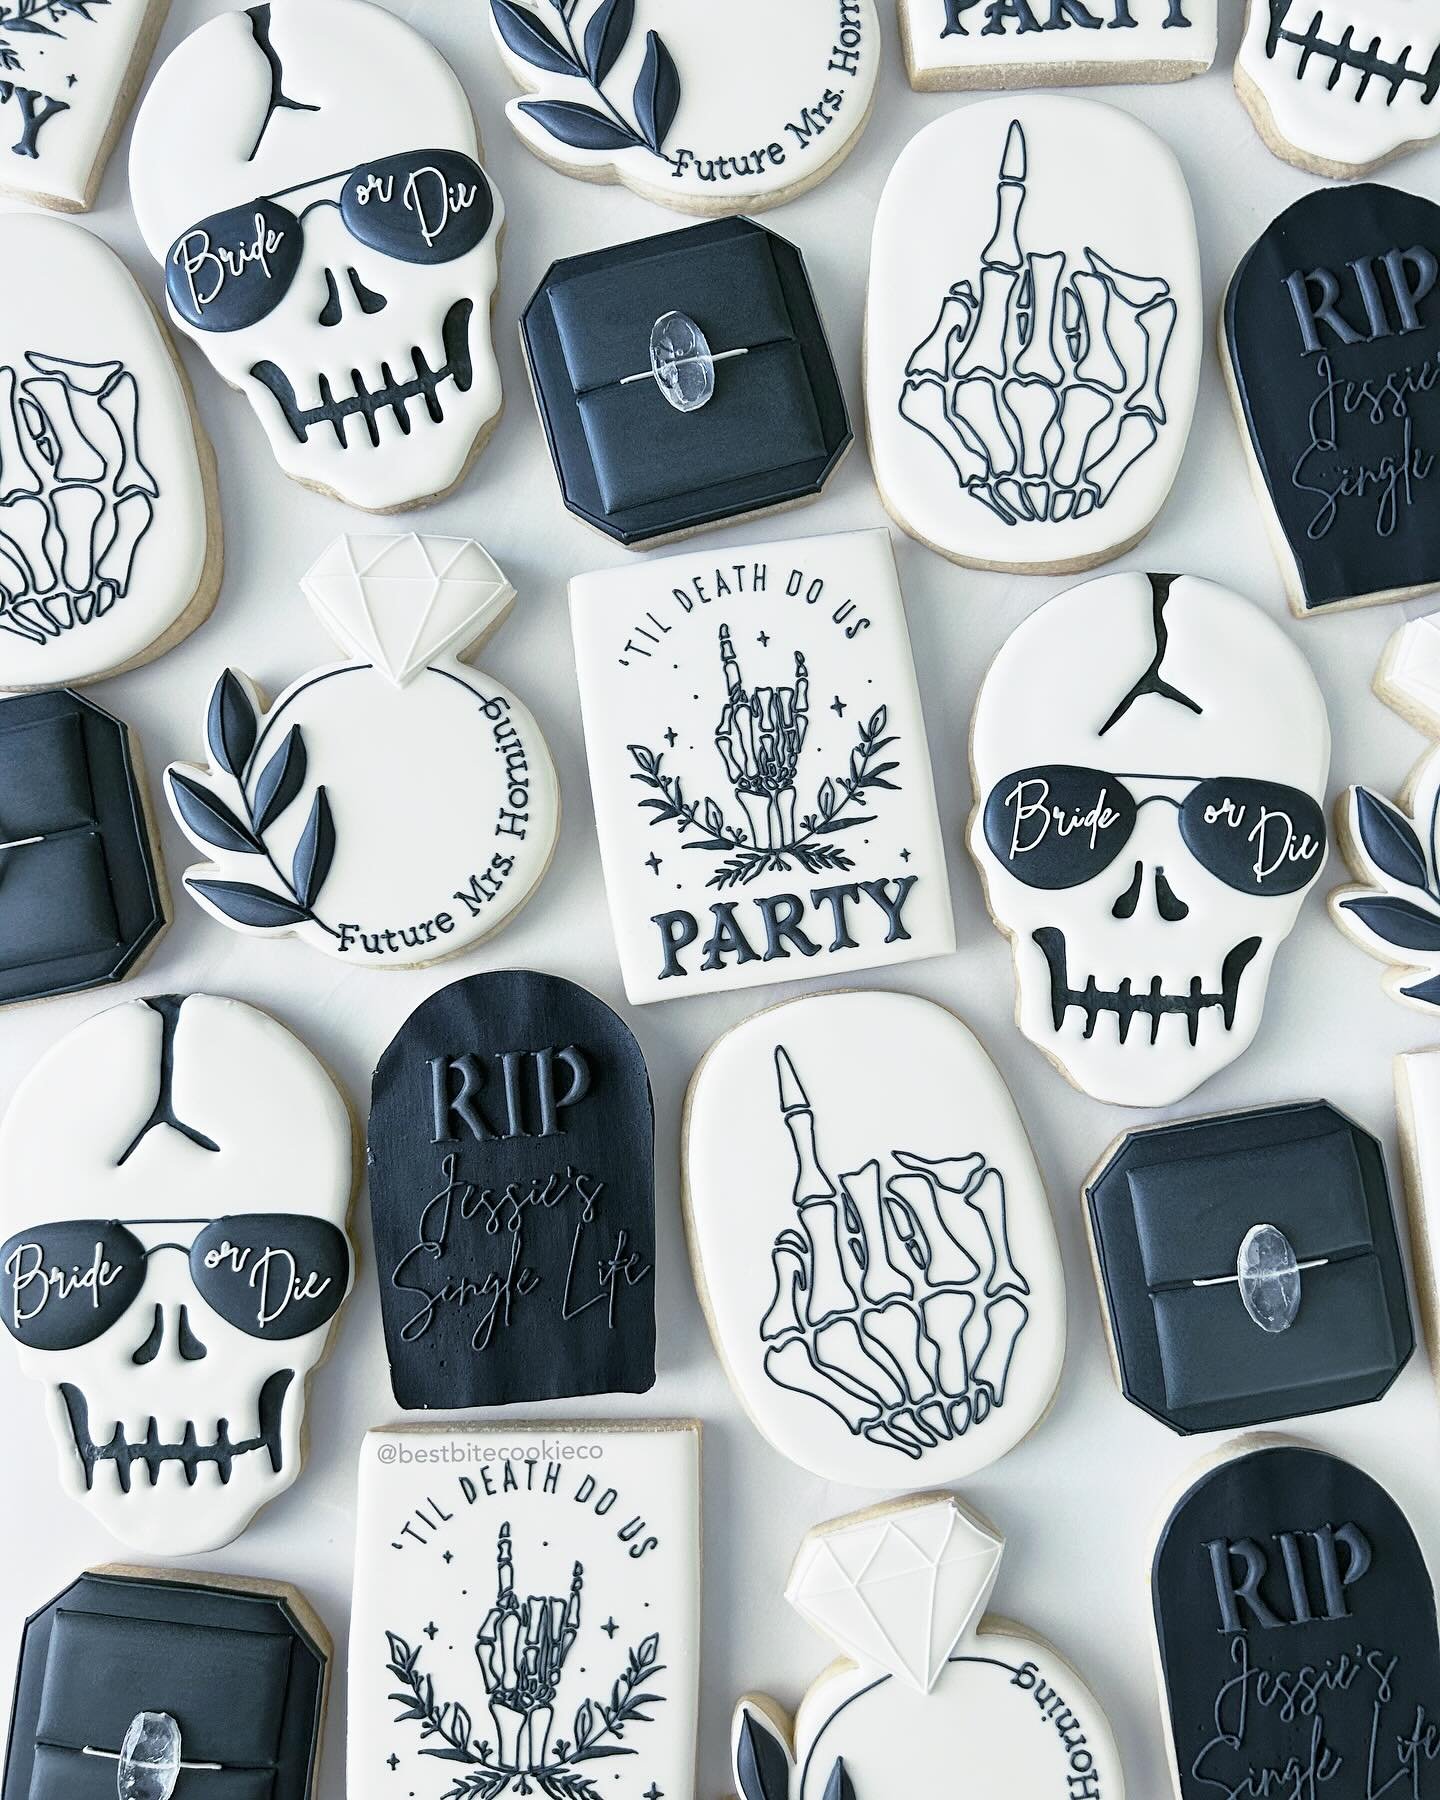 RIP single life 💀💍

&mdash;Full look&hellip; ahhh I love how these turned out 🖤

#ripsinglelife #hereliessinglelife #tildeathdouspartycookies #tildeathdousparty #brideordie #bachelorettecookies #bachelorettepartyideas #bachelorettethemes #decorate